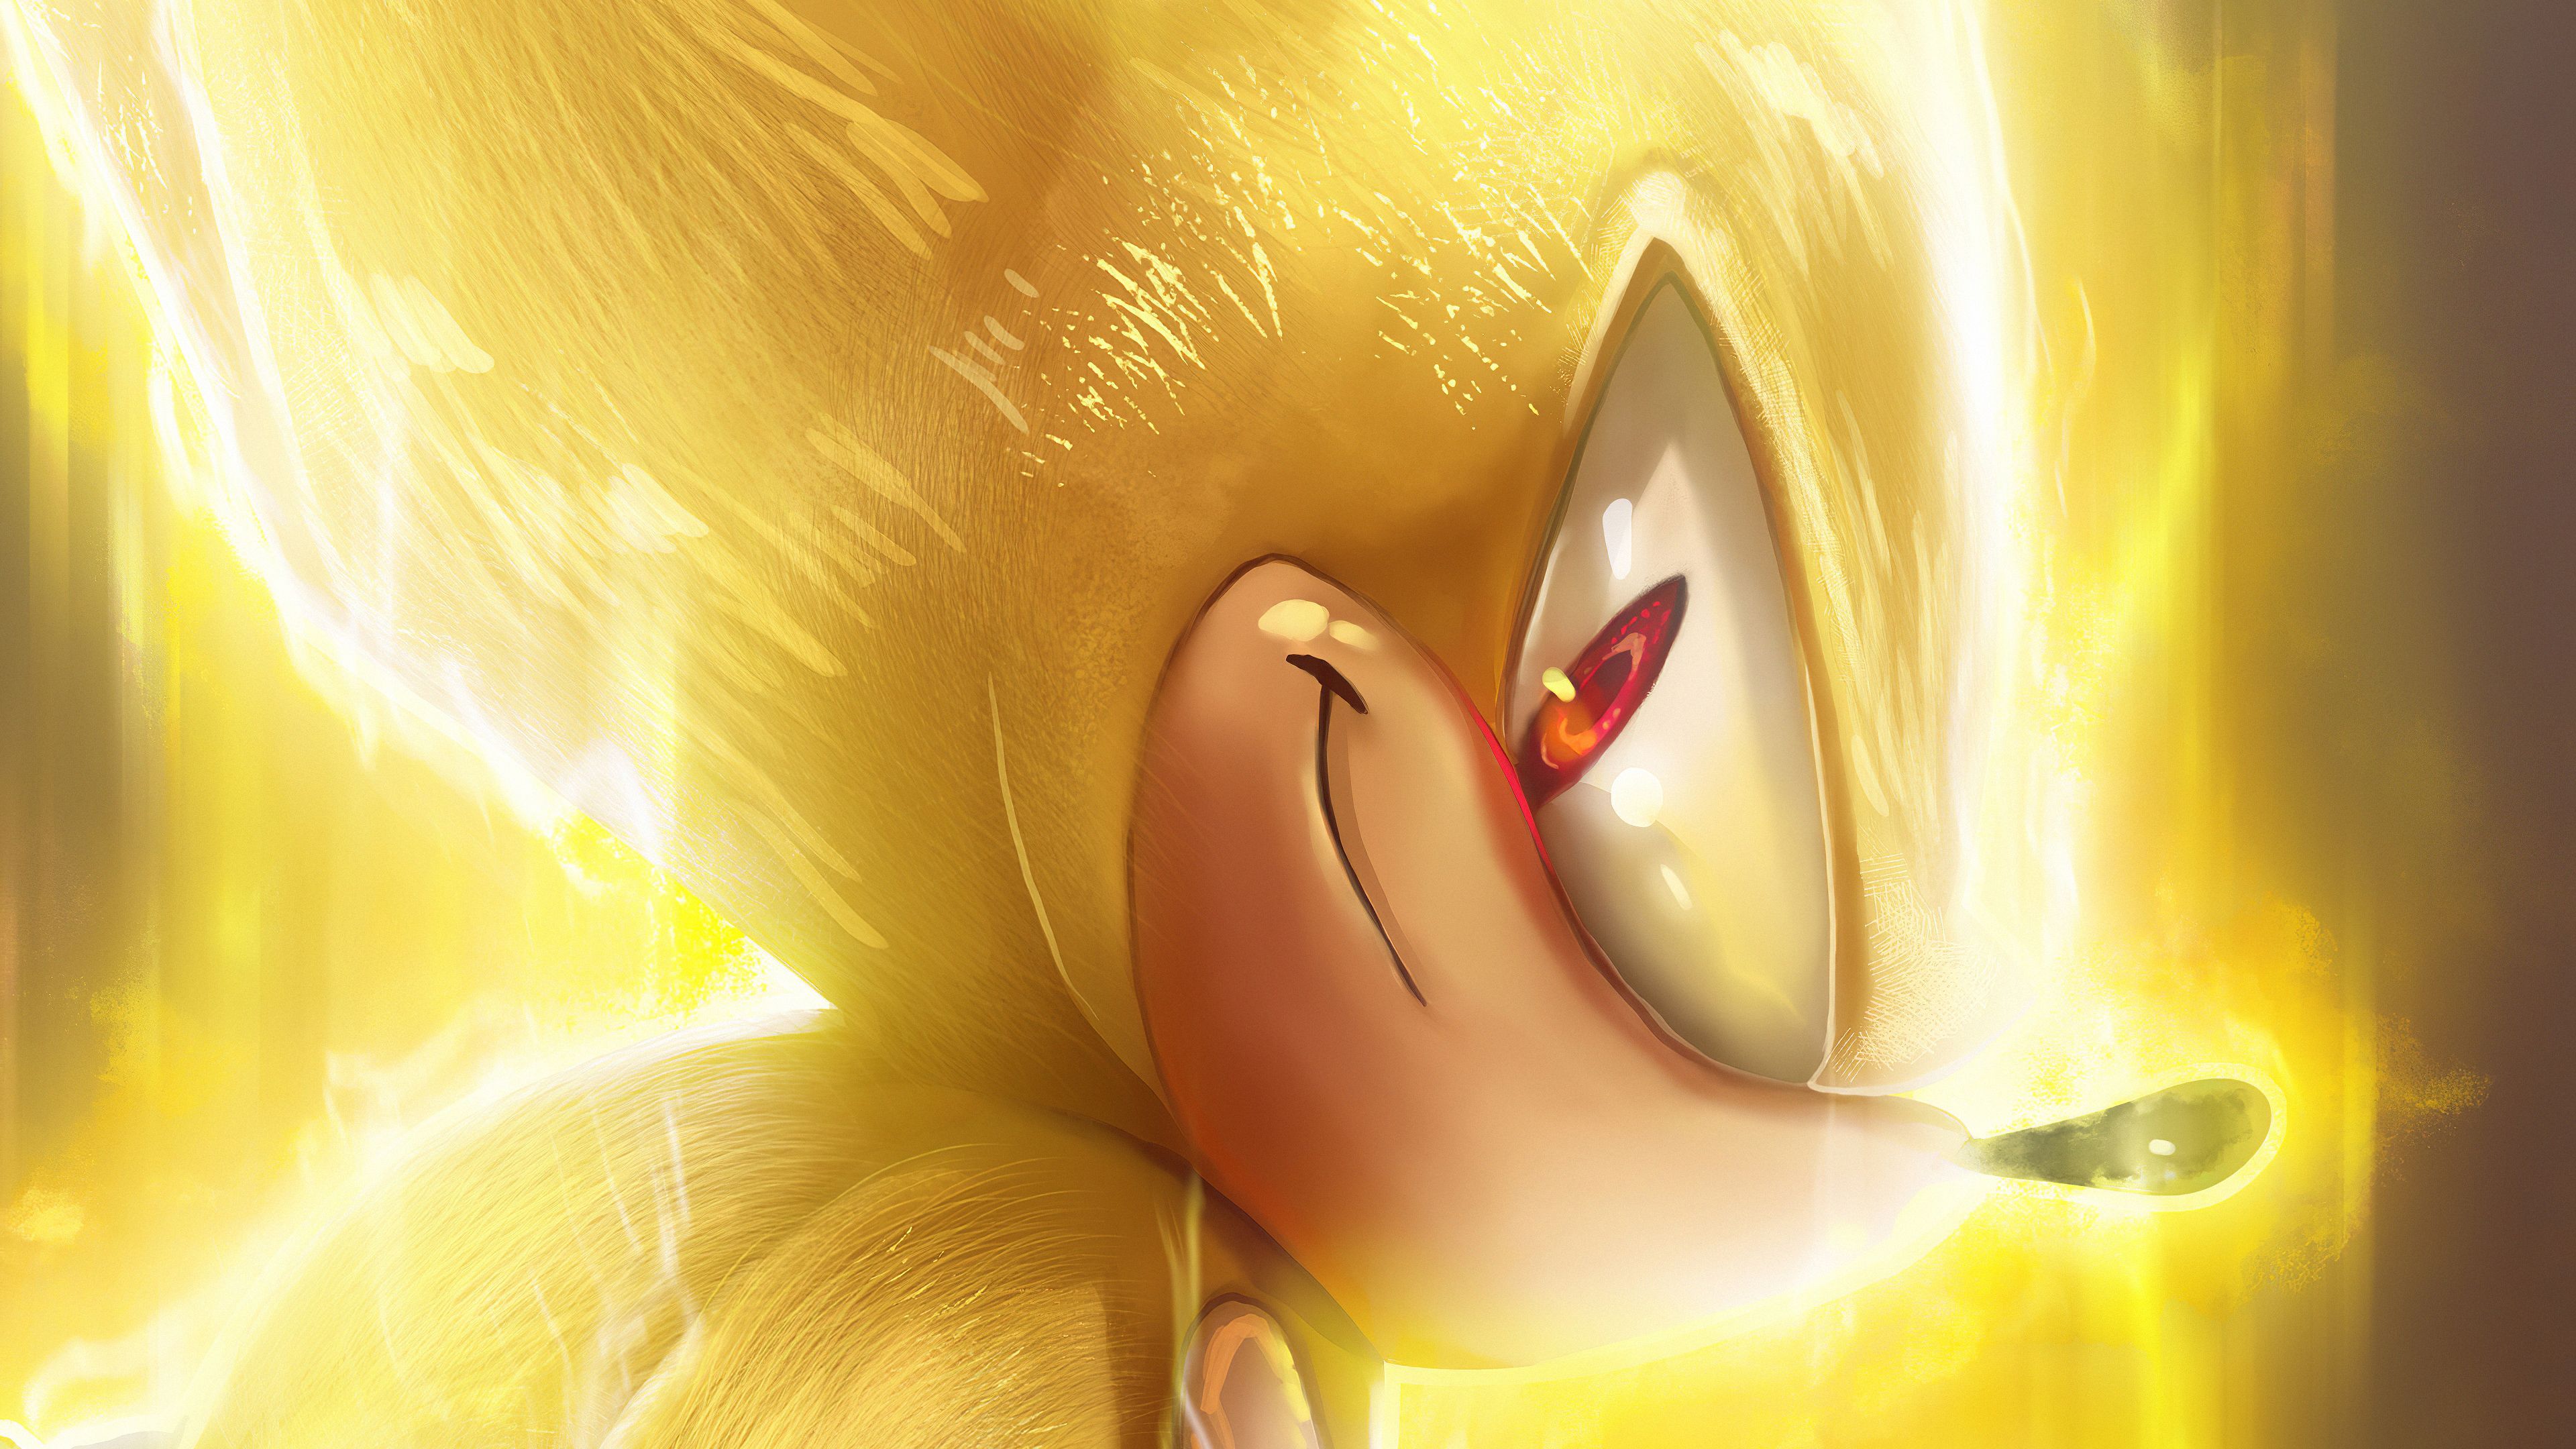 Sonic The Hedgehog yellow power Sonic The Hedgehog wallpaper 4k, Sonic The Hedgehog phone wallpaper 4k, Sonic The Hedg. Sonic the hedgehog, Sonic, Phone wallpaper